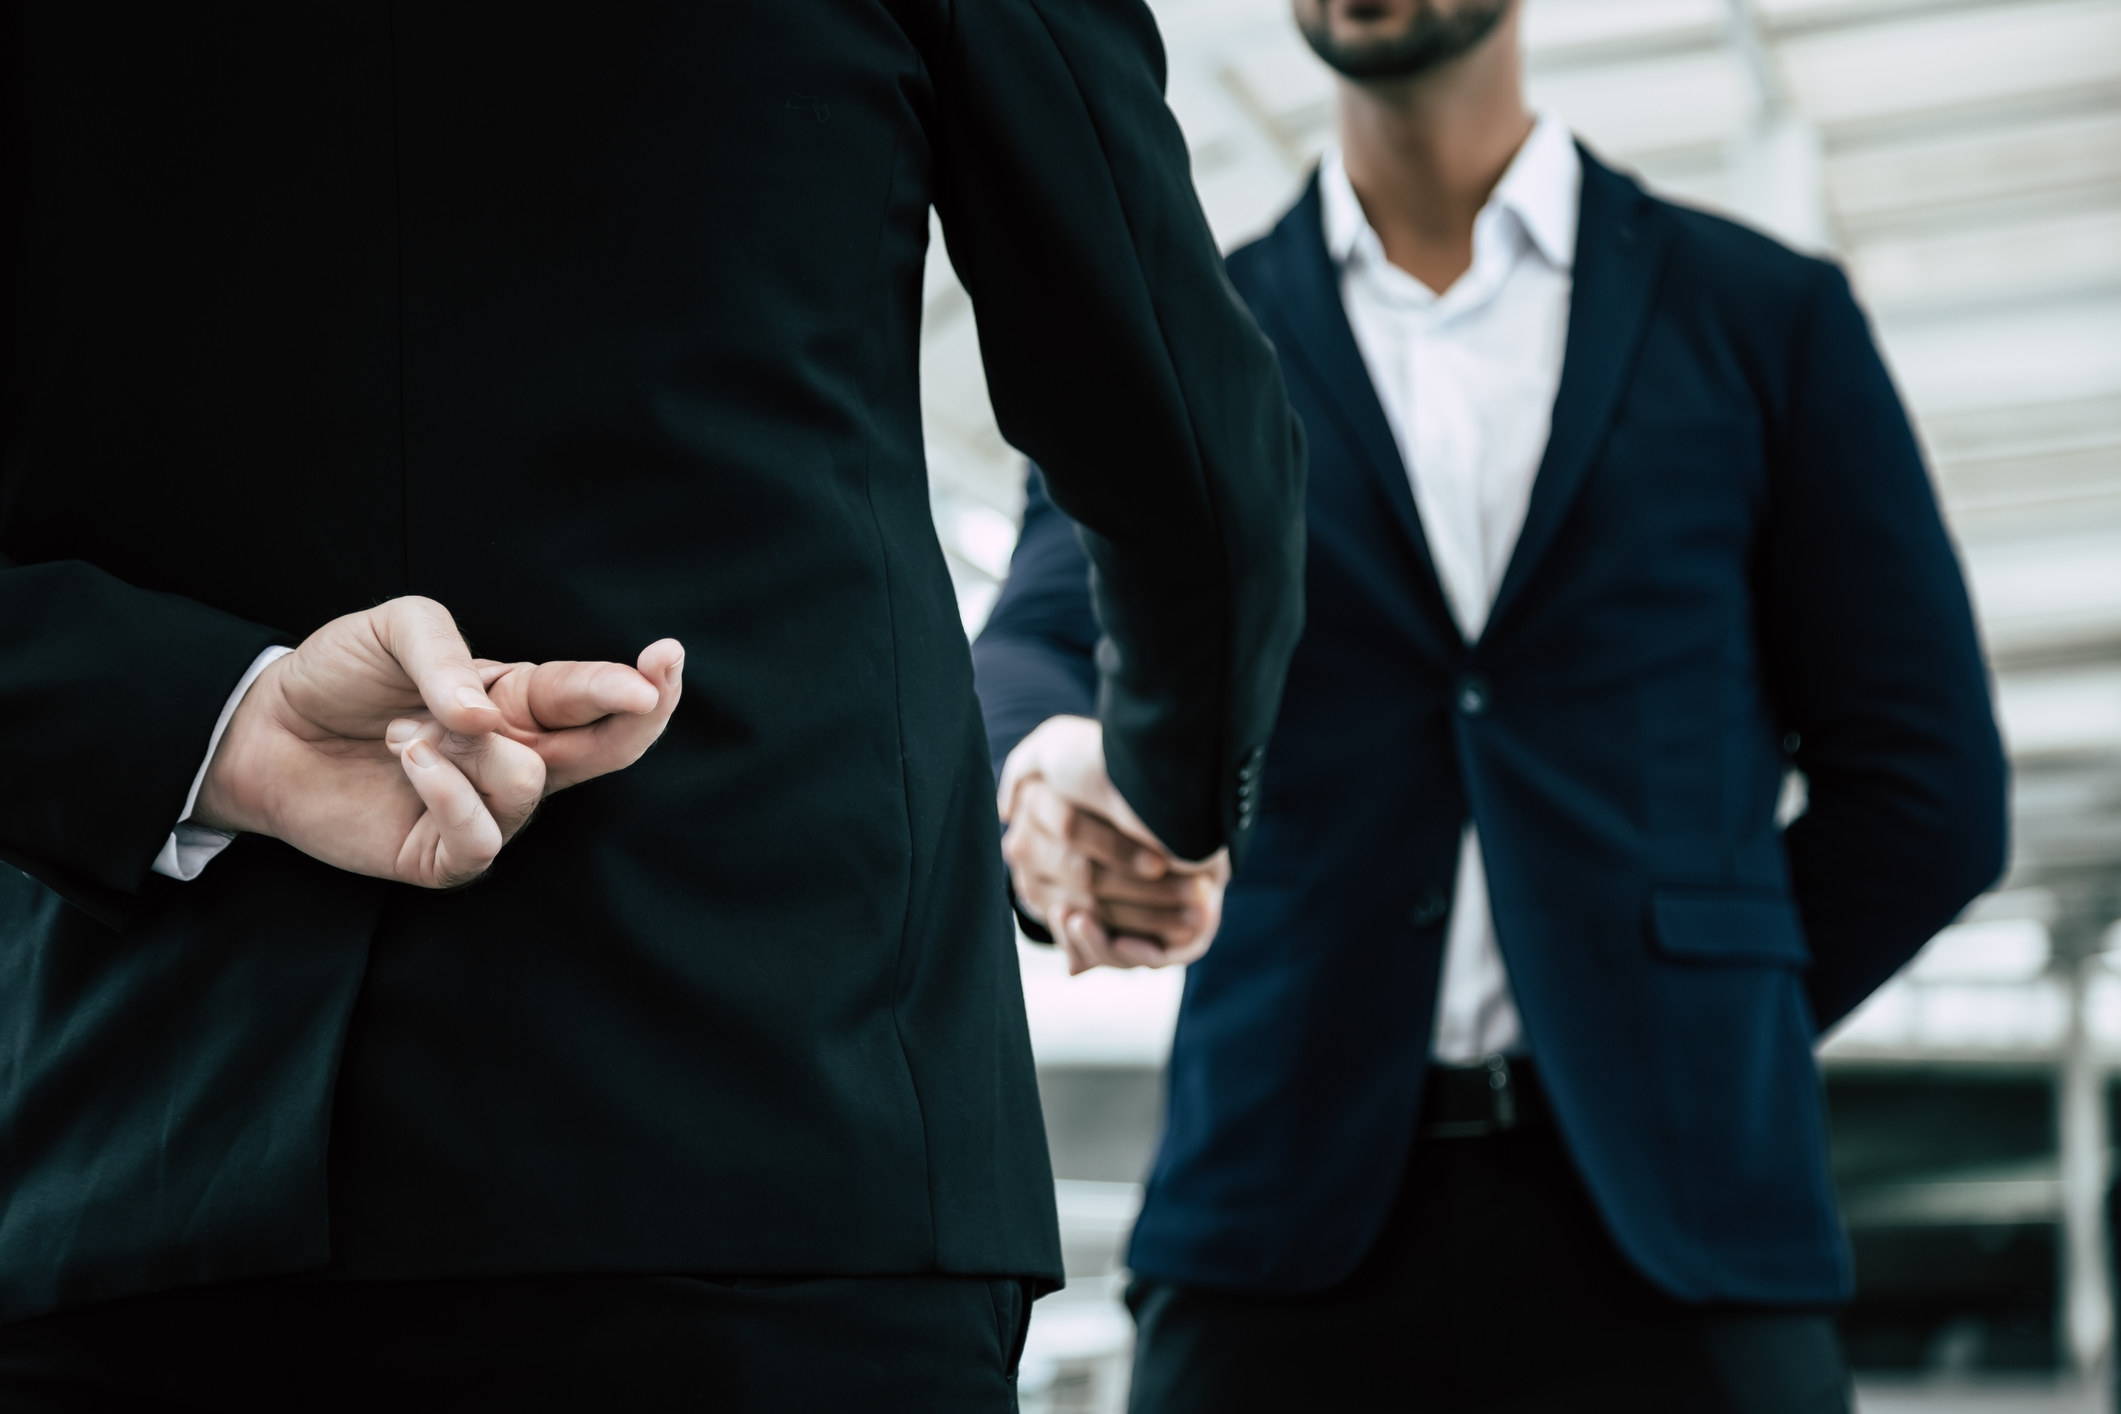 Man crossing fingers behind his back while shaking hands with another man